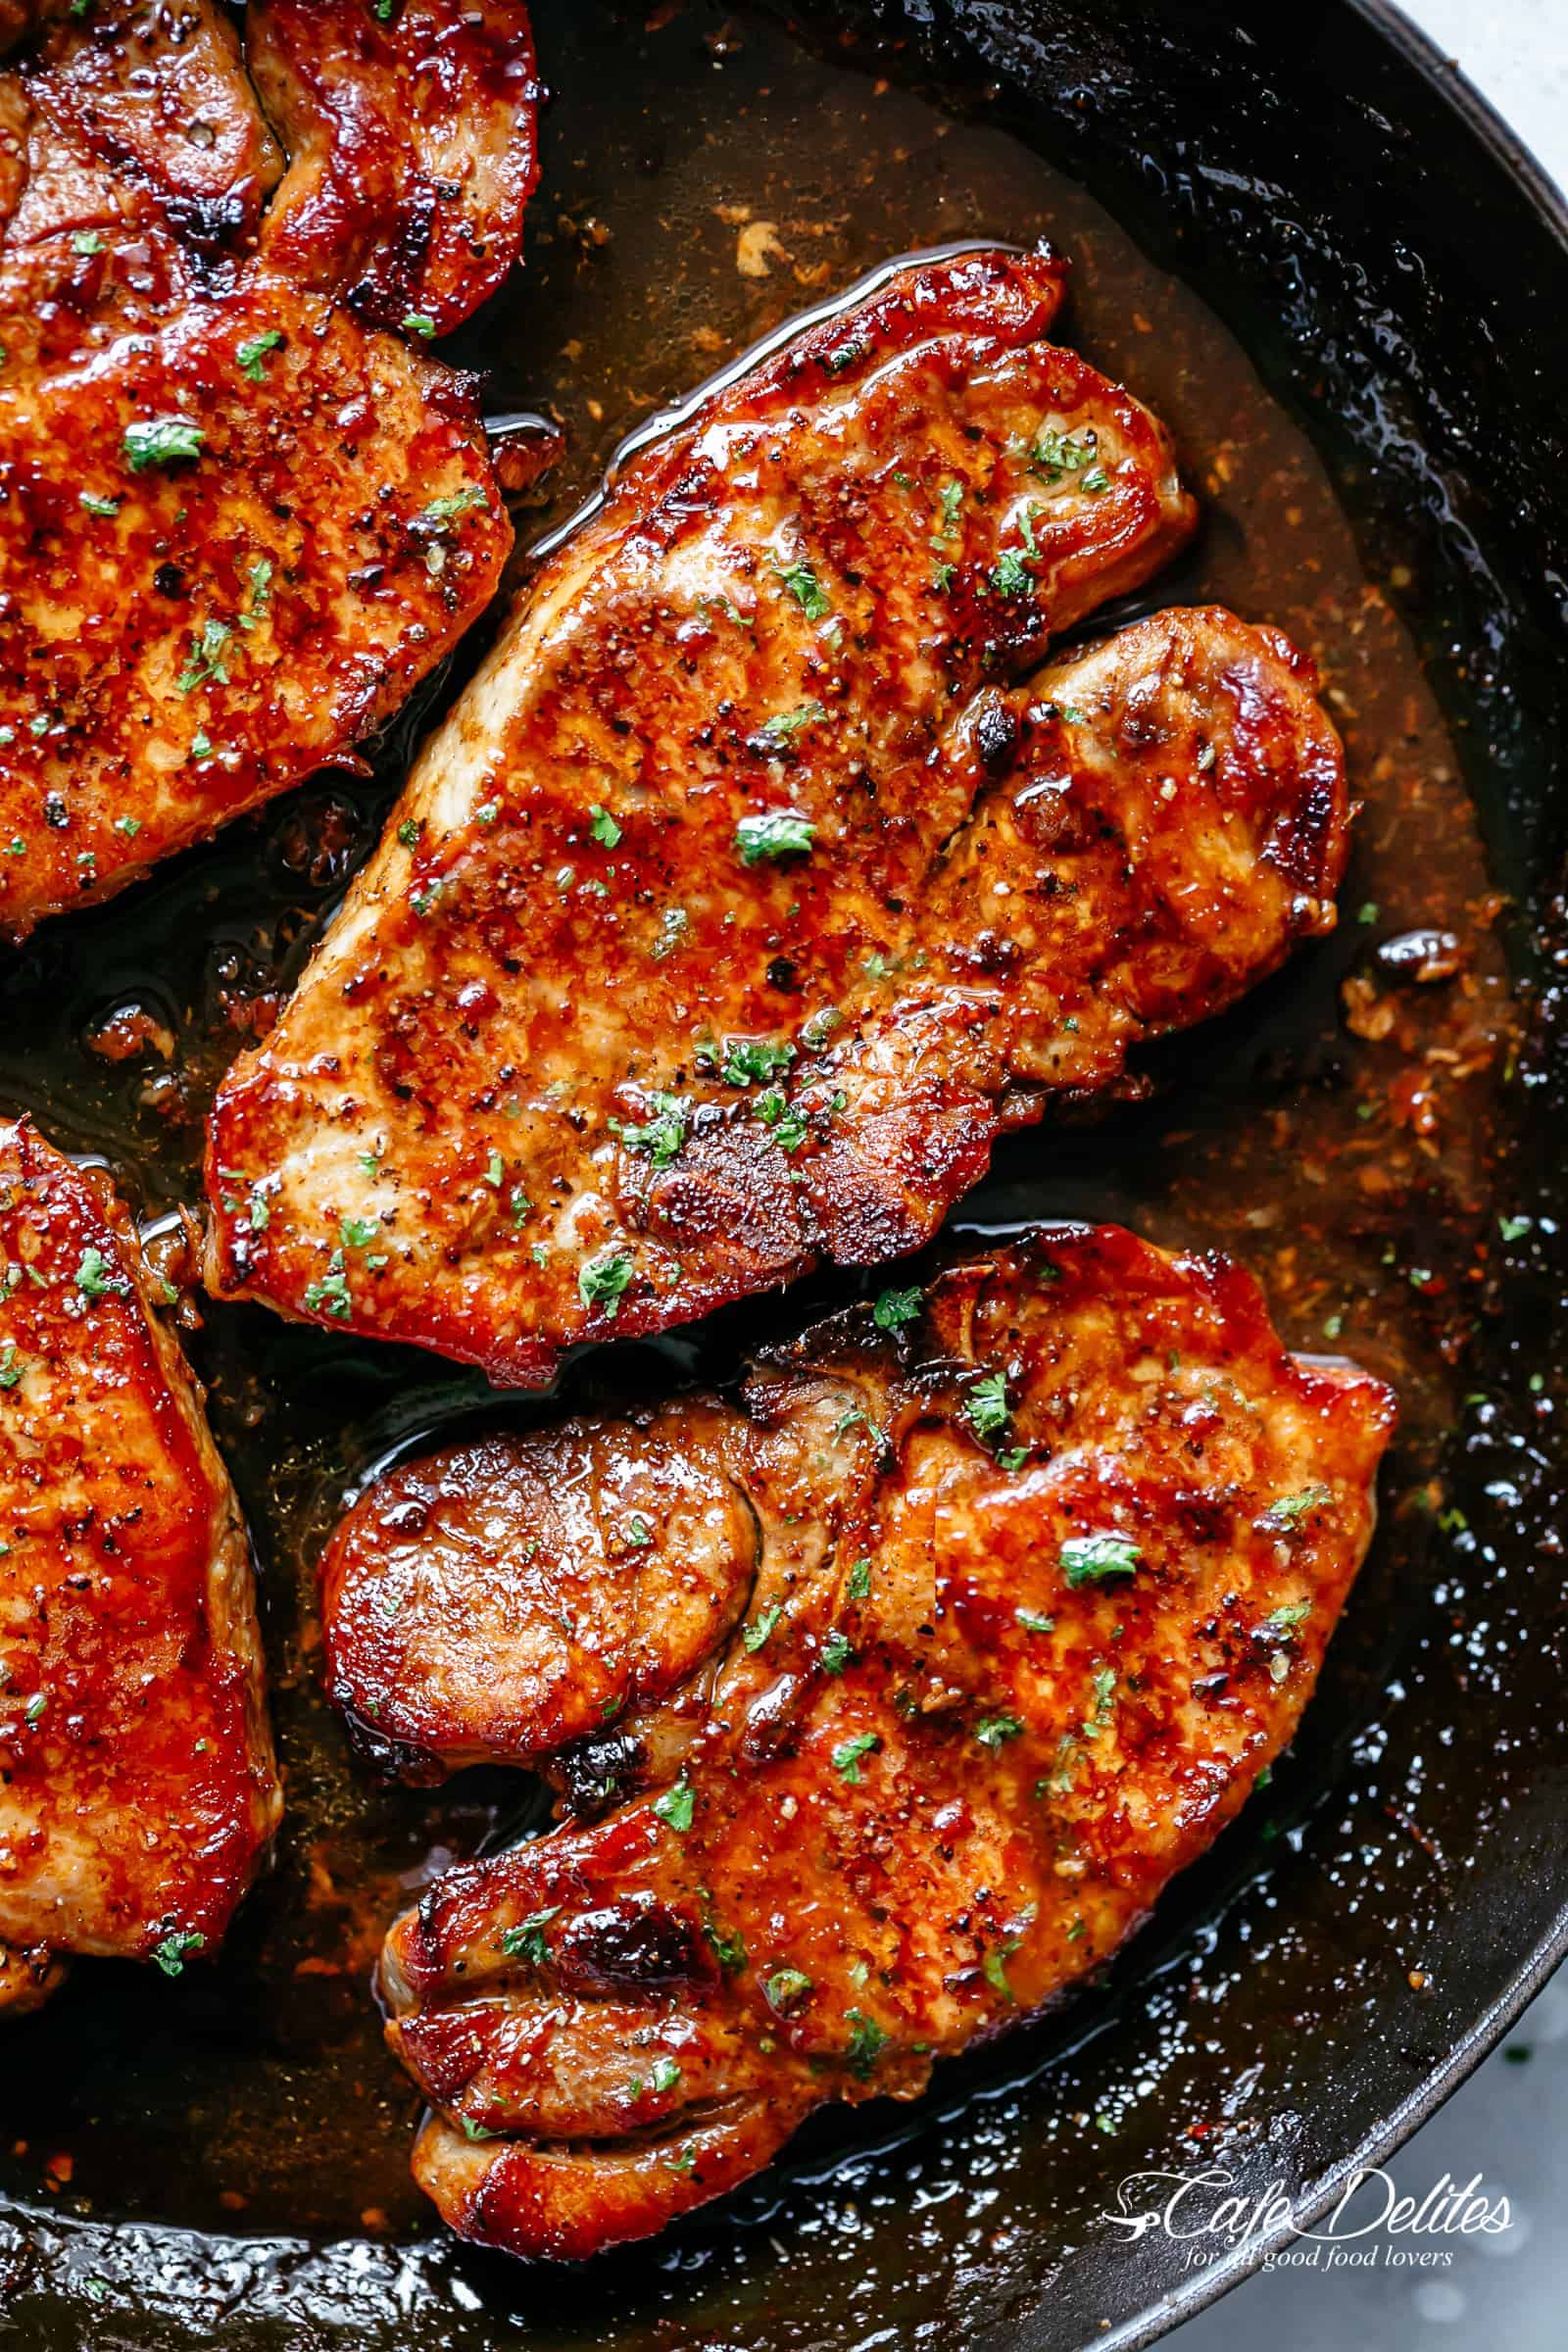 Easy Honey Garlic Pork Chops made simple, with the most amazing and addictive 4-ingredient honey garlic sauce that is so good you’ll want it on everything! | cafedelites.com